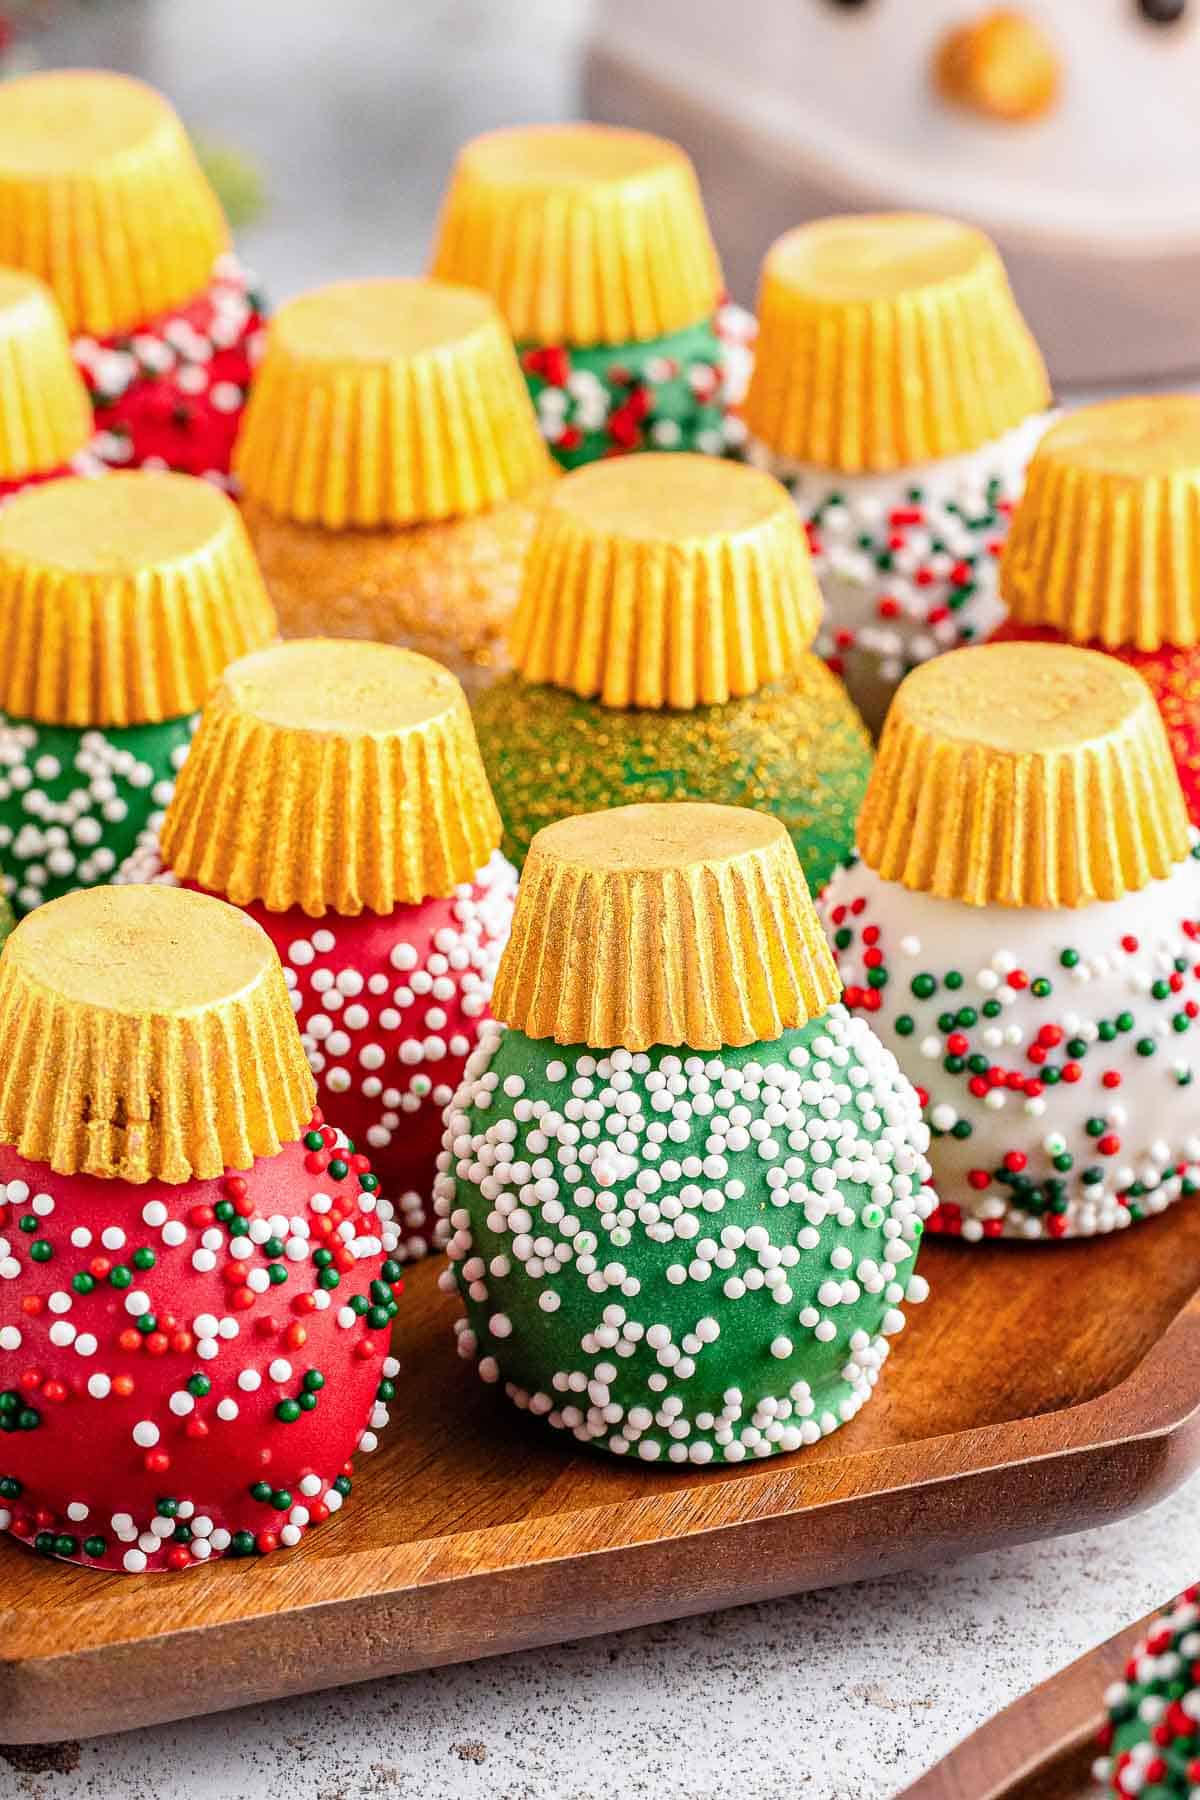 A tray of Christmas oreo balls with different colored holiday sprinkles.